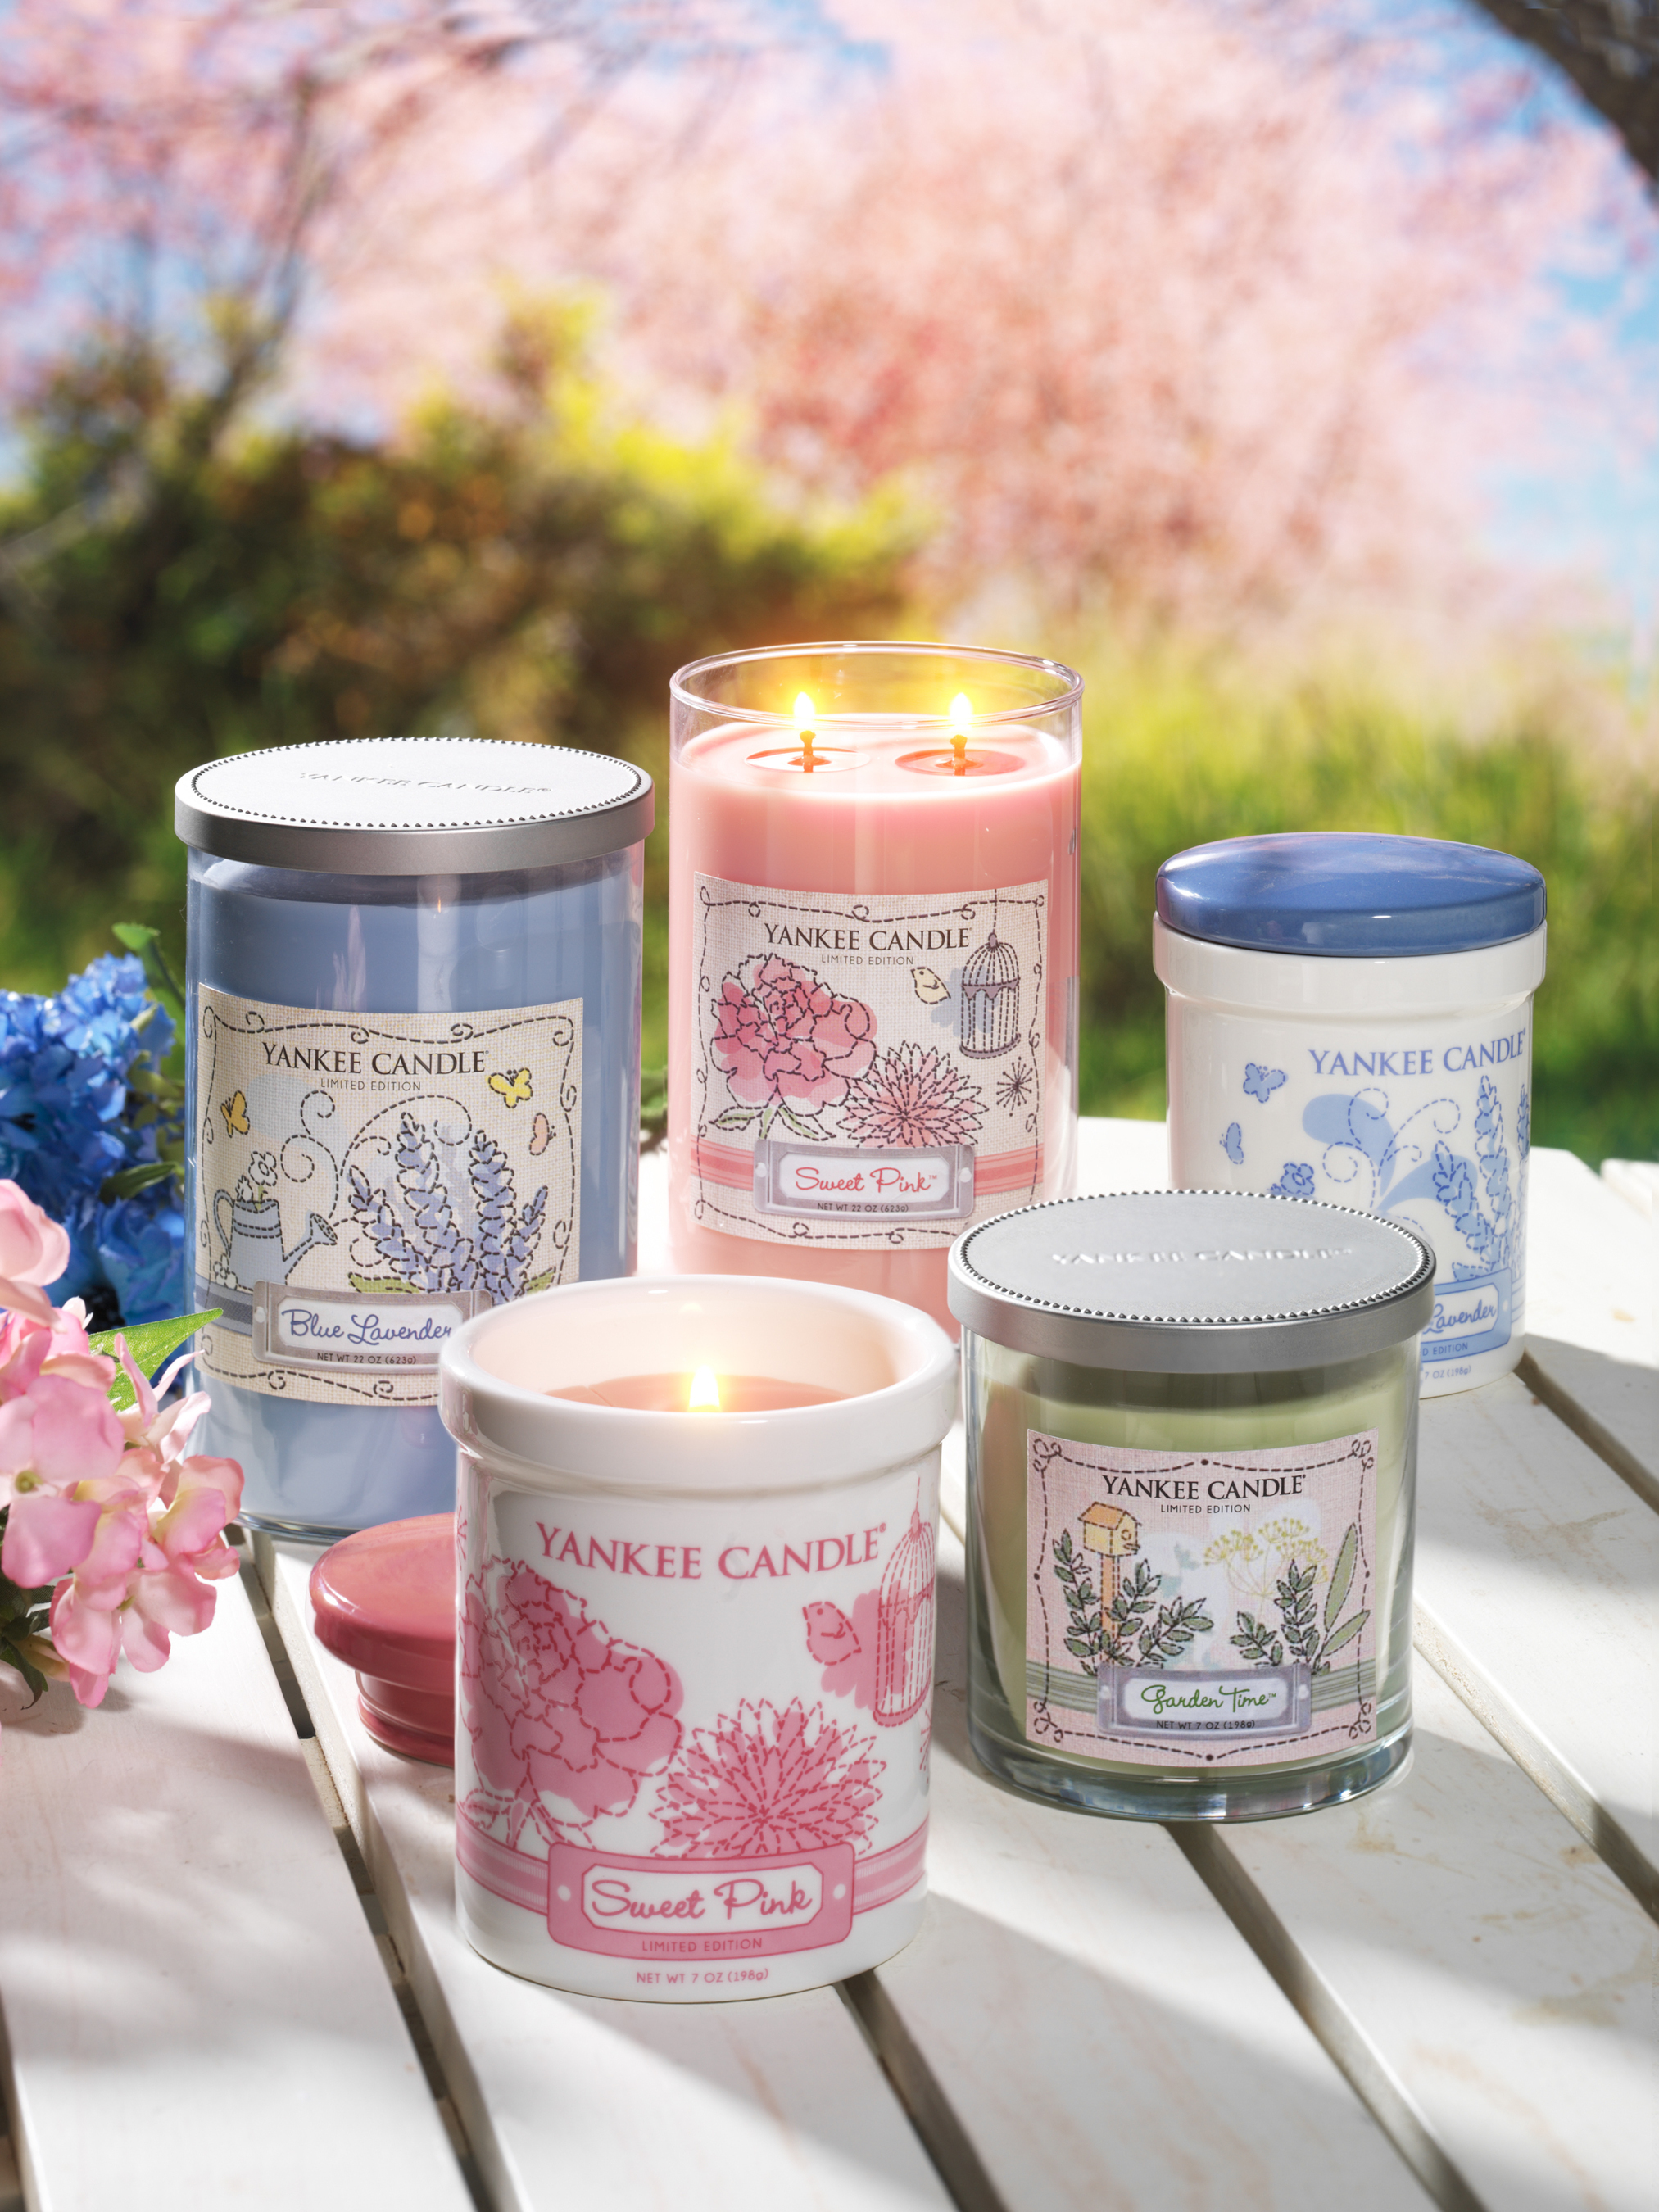 Yankee Candle's new limited edition Dream Garden collection features three feminine garden fragrances in both a tumbler and crock form. (PRNewsFoto/The Yankee Candle Company, Inc.)